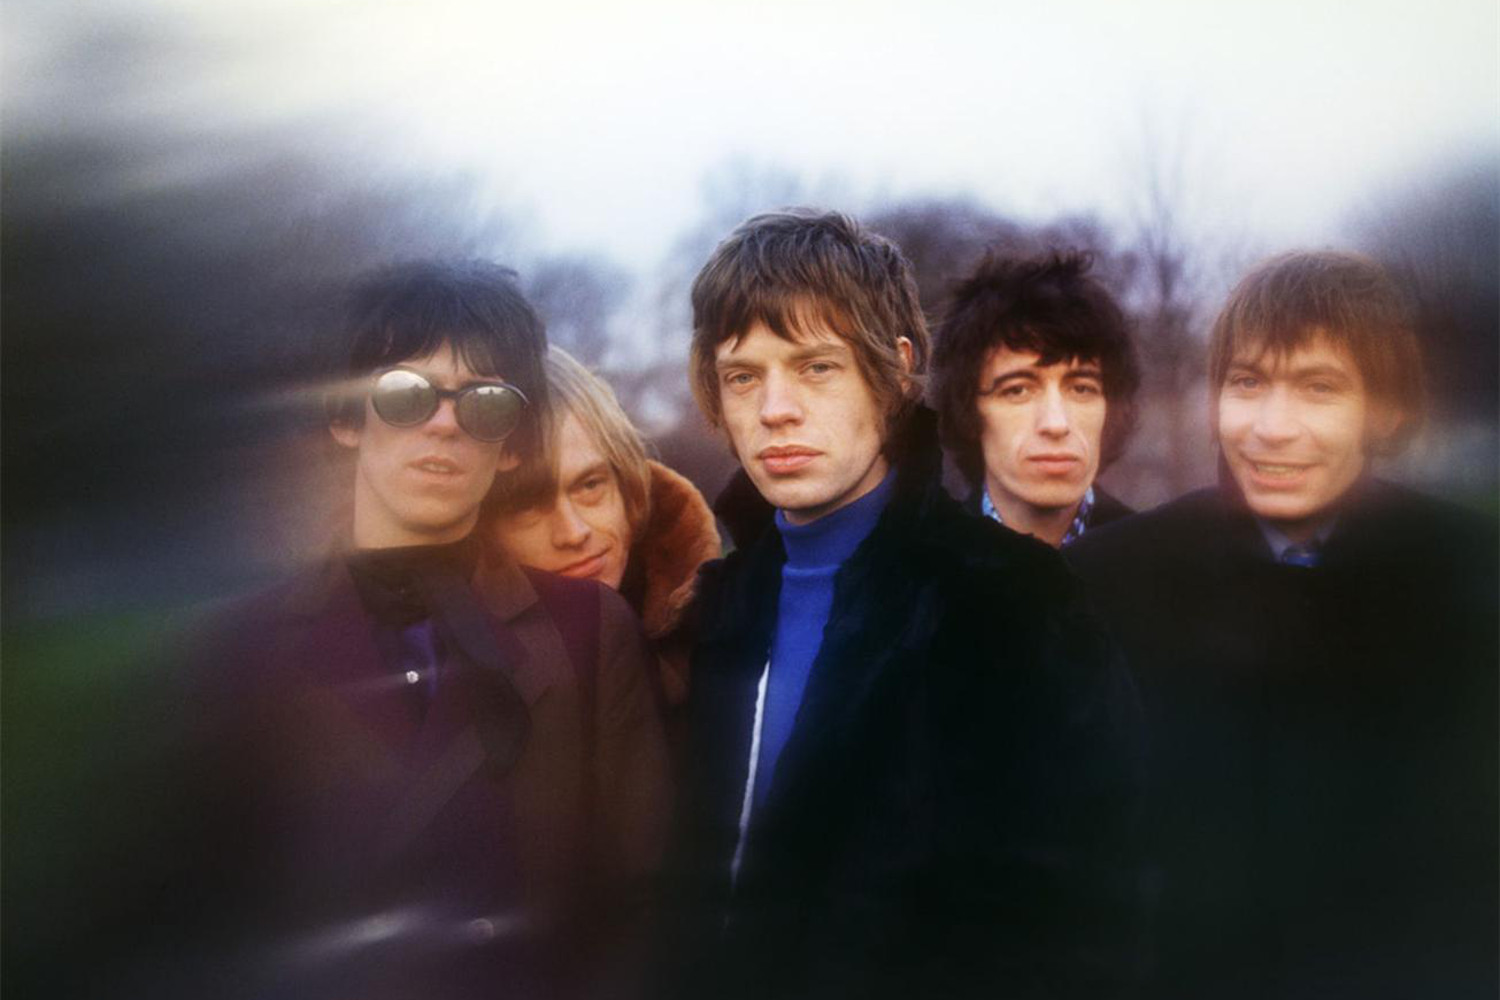 Watch now: The Rolling Stones premiere Ruby Tuesday lyrics video